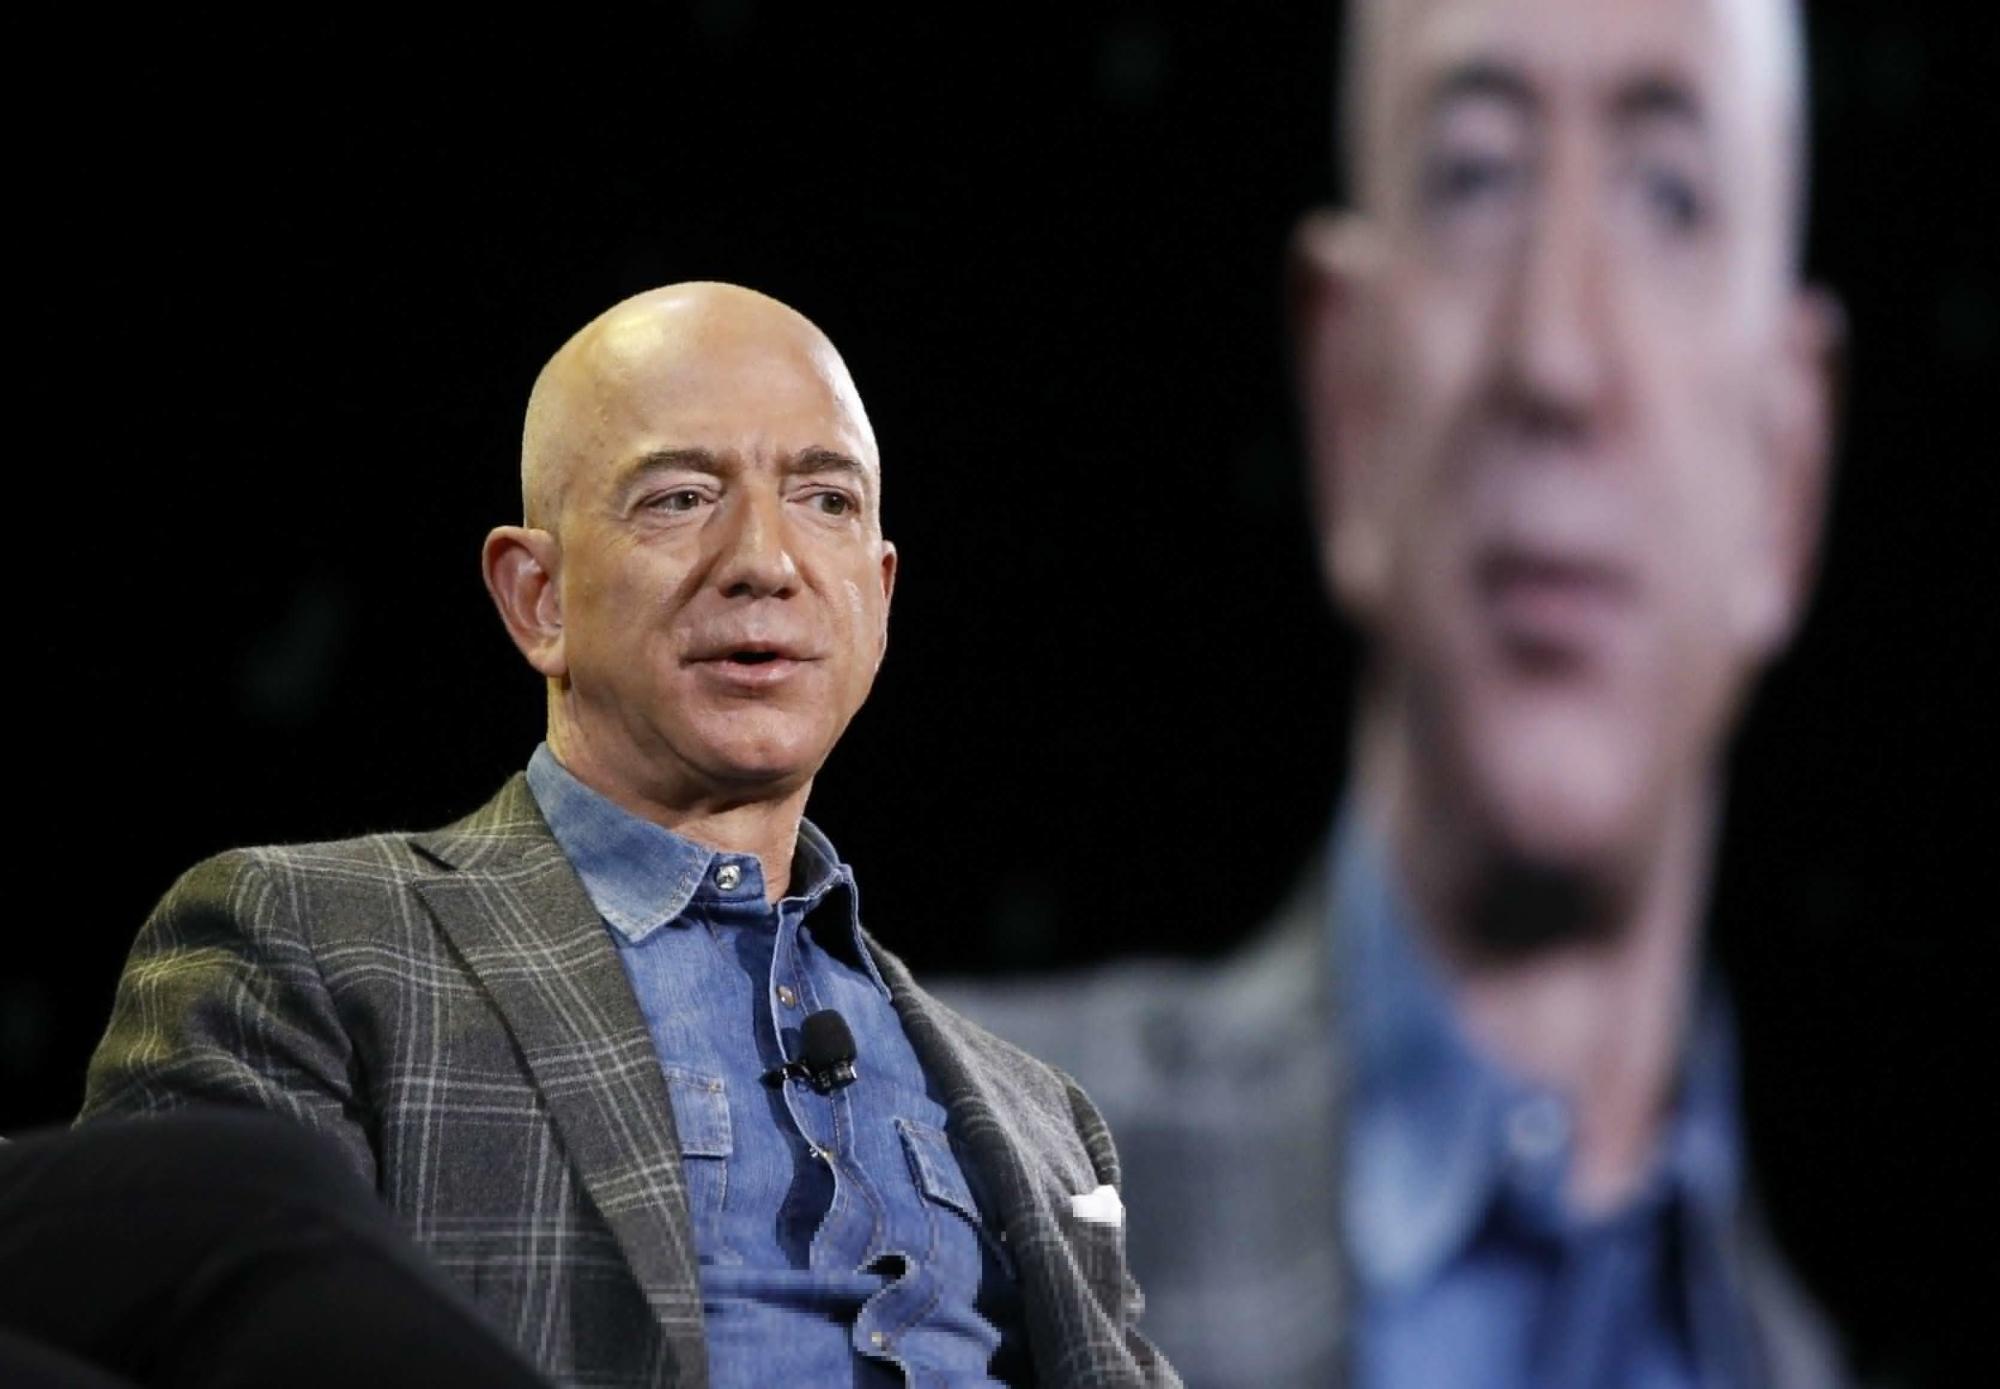 Jeff Bezos lost $13.5 billion and there is concern at Amazon